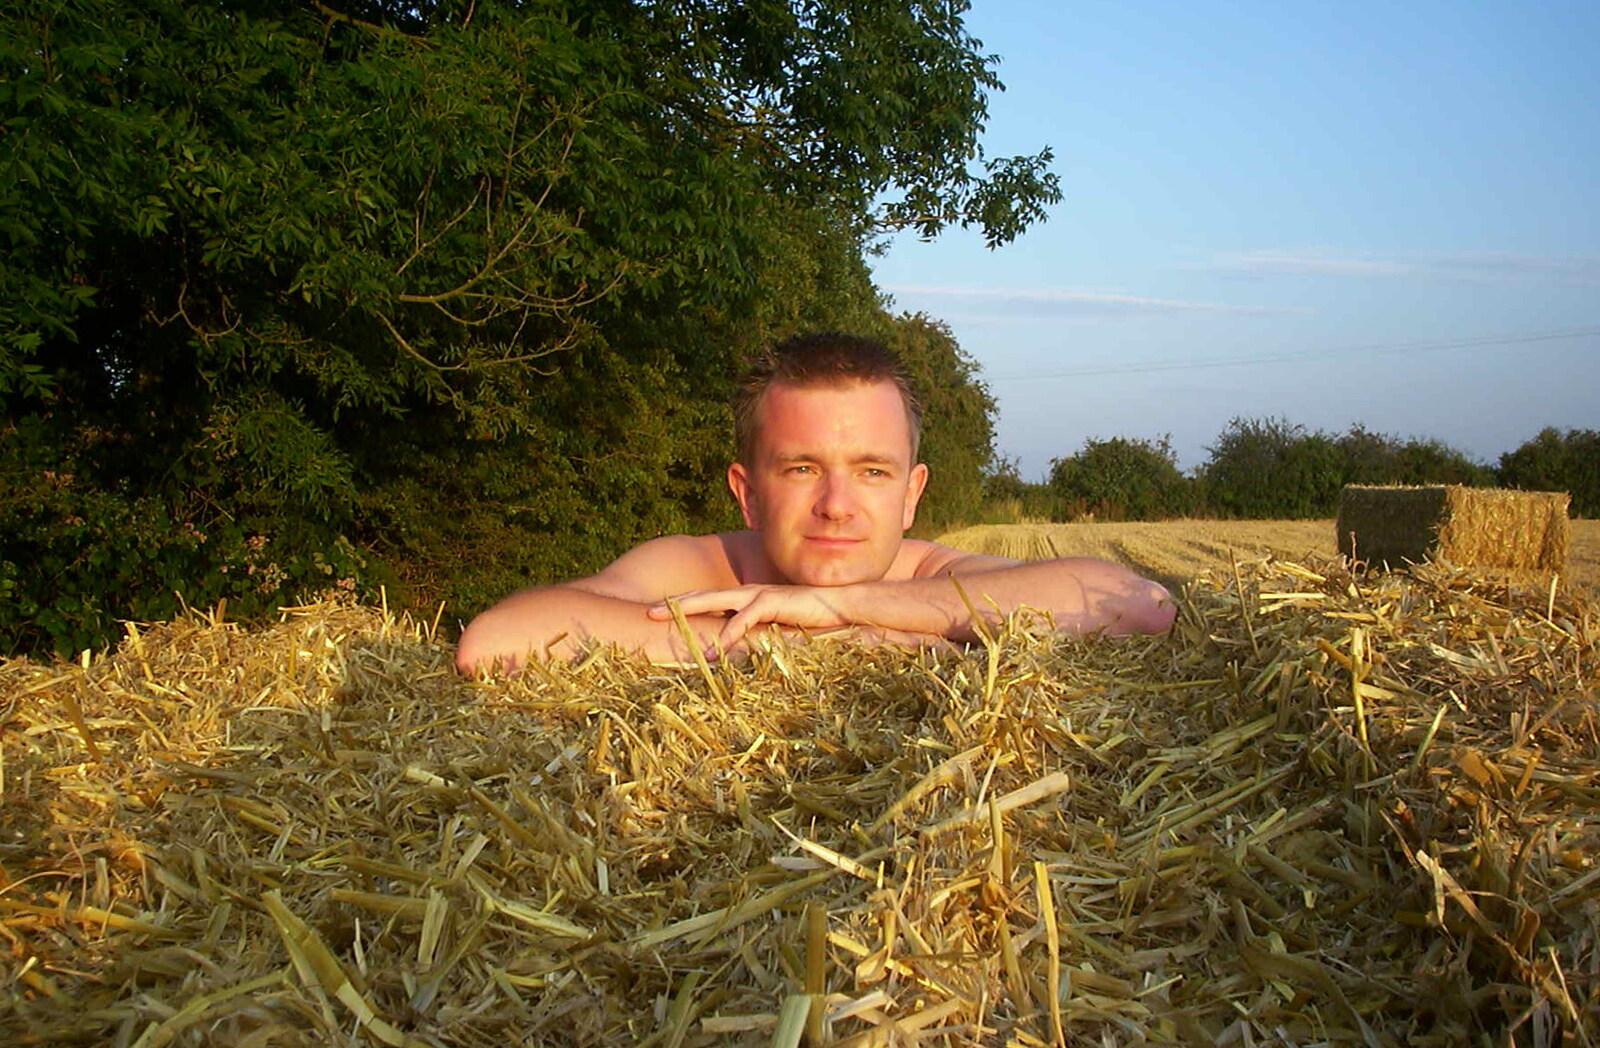 Nosher leans on a bale in the sun from BSCC Rides, Petanque at the Swan and July Miscellany - 21st July 2002